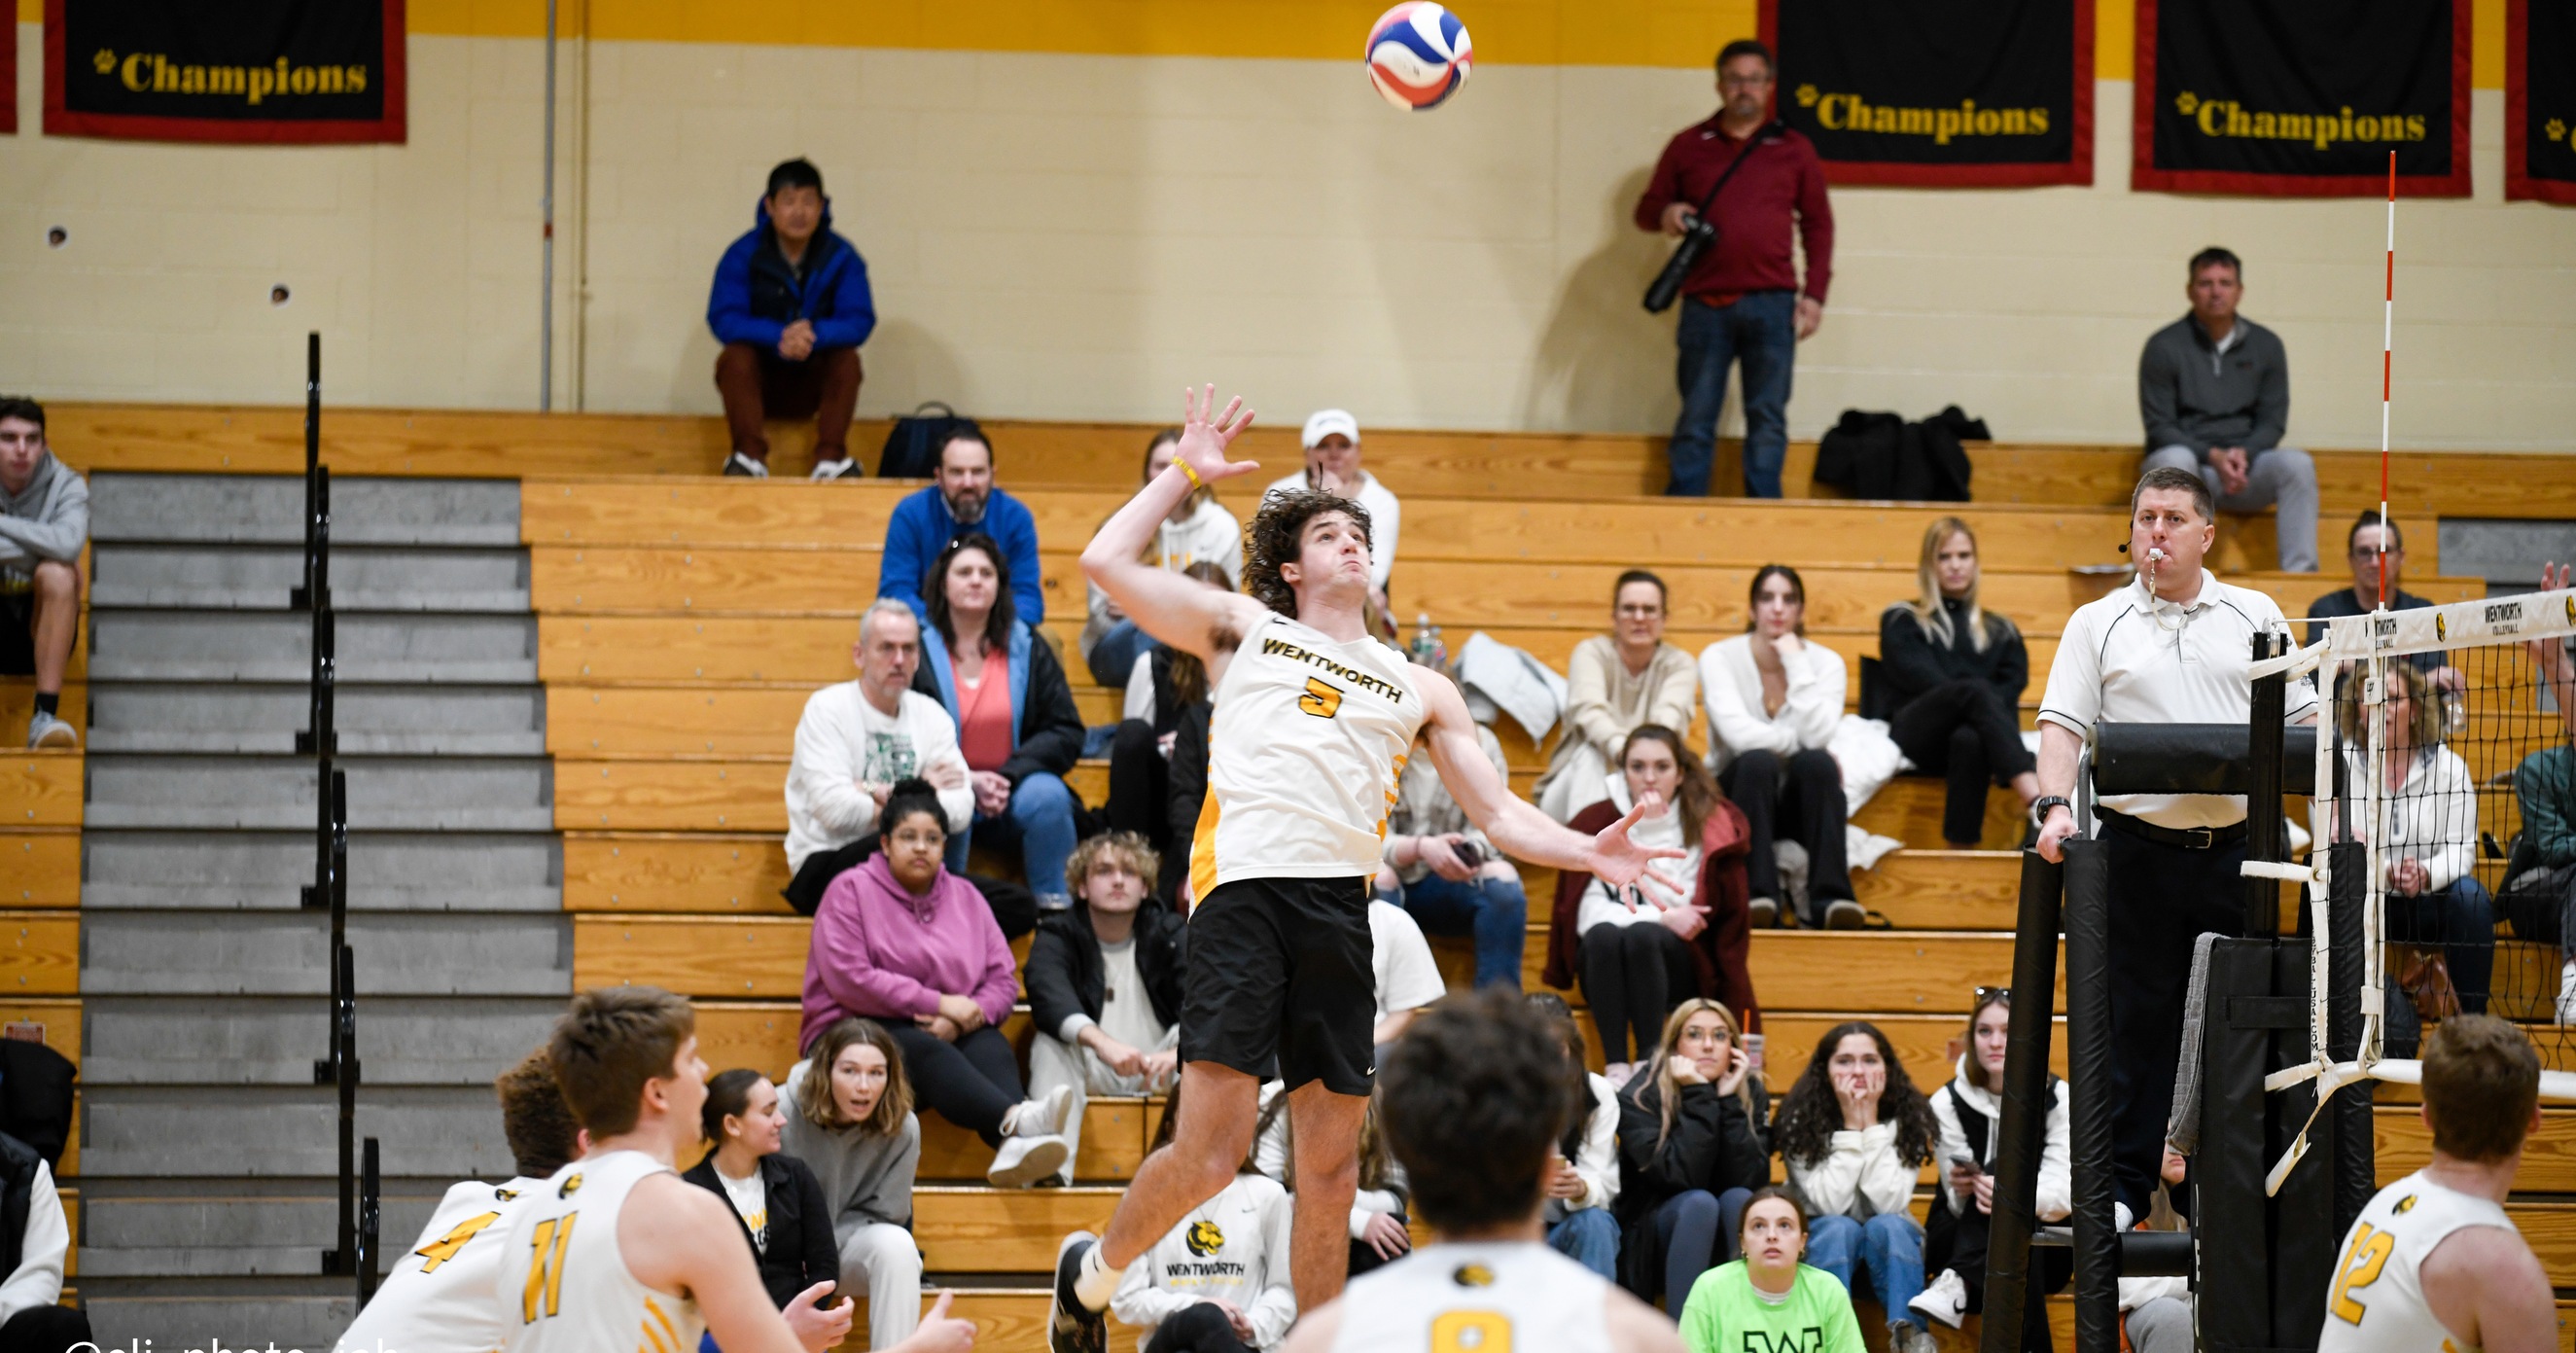 Oshman Leads Men's Volleyball's Sweep over Emmanuel